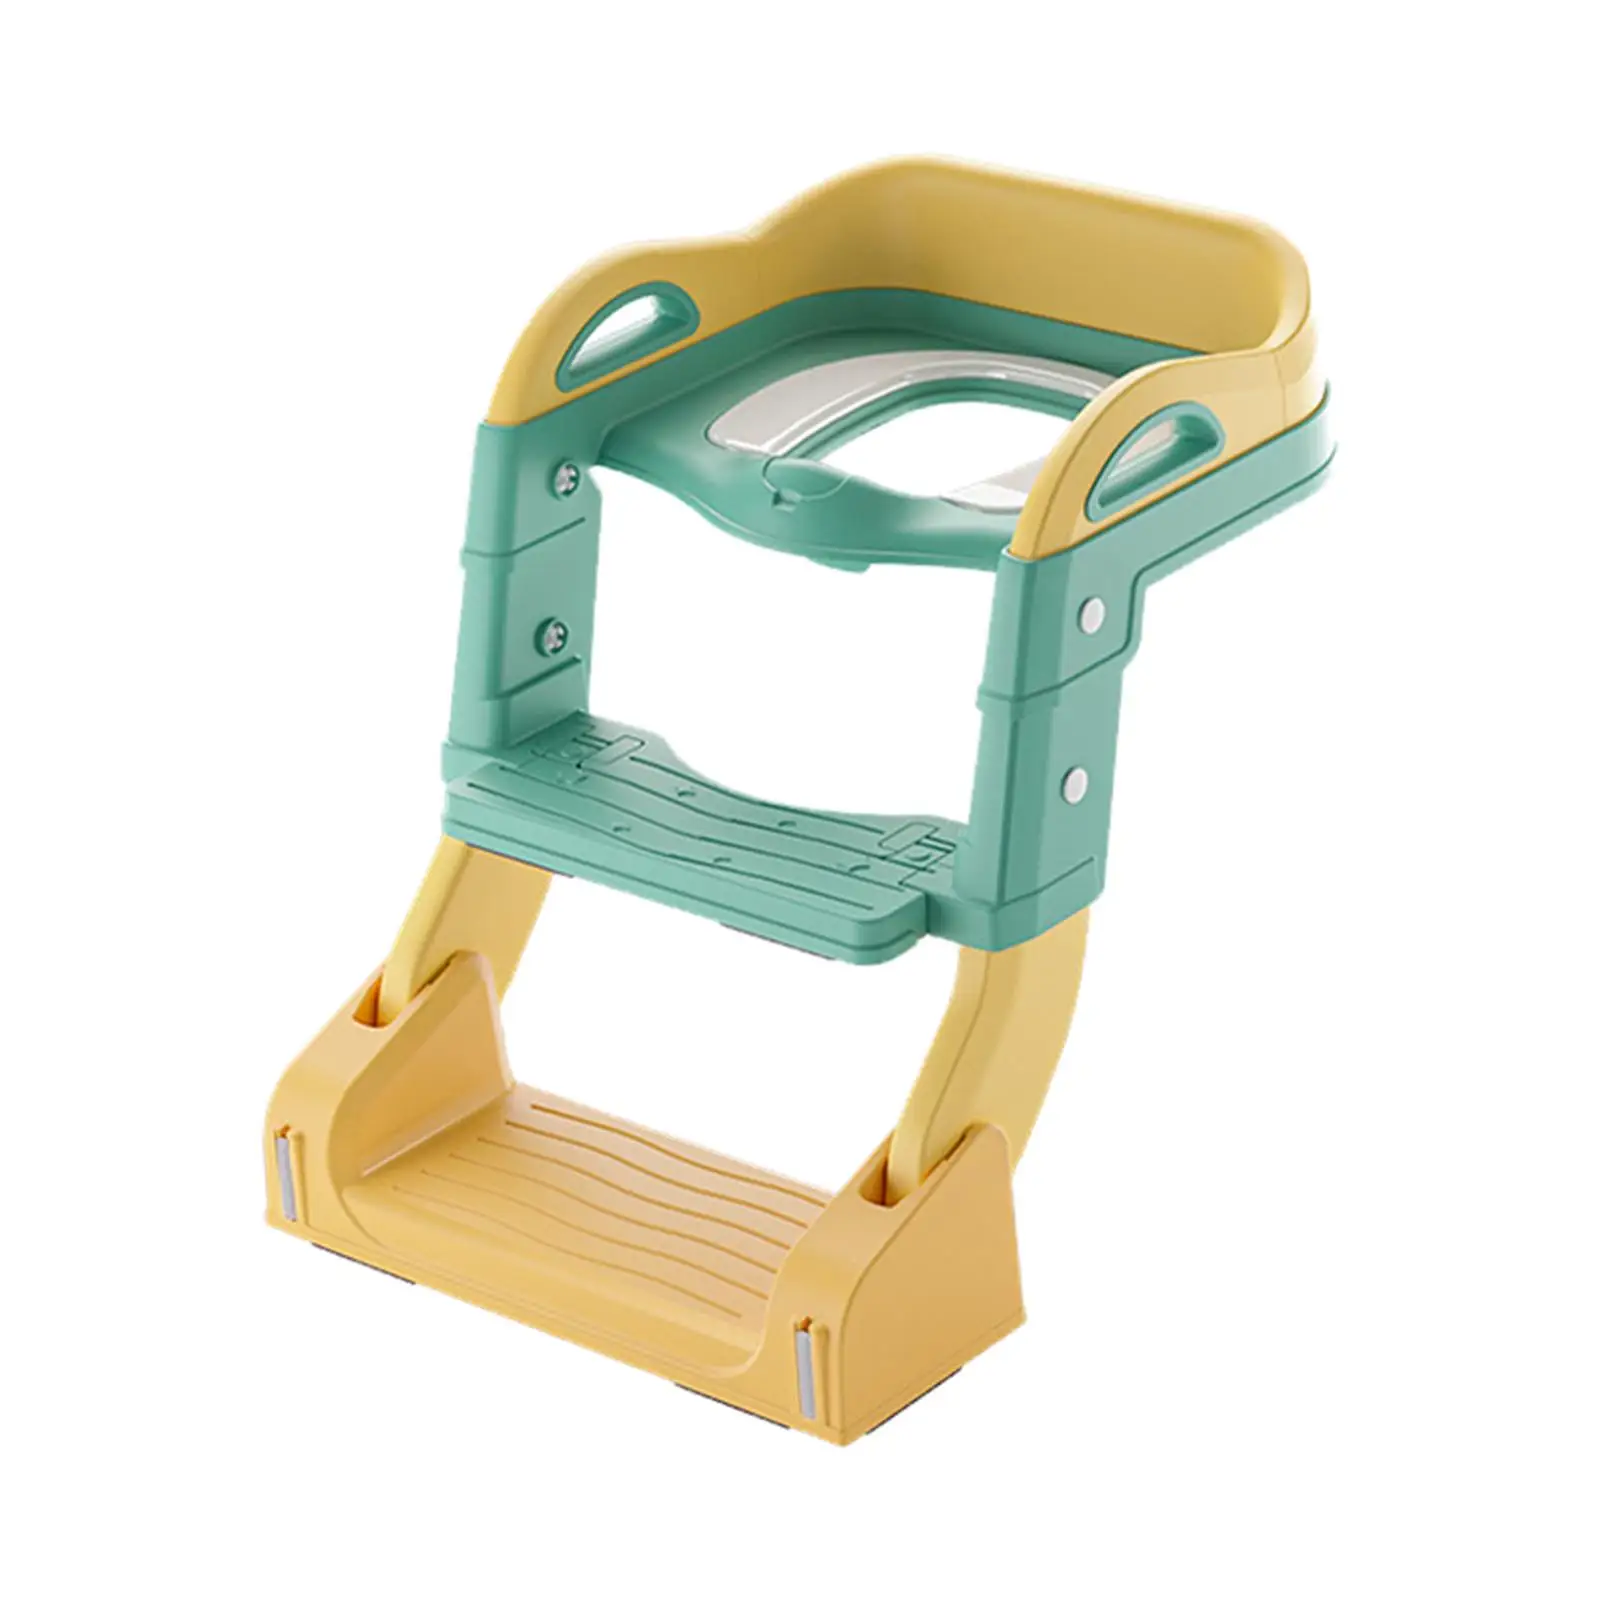 Kids Toilet Training Seat Step Stool Ladder Baby Infant Potty Foldable Soft Cushion Waterproof Portable Toilet Trainer Seat